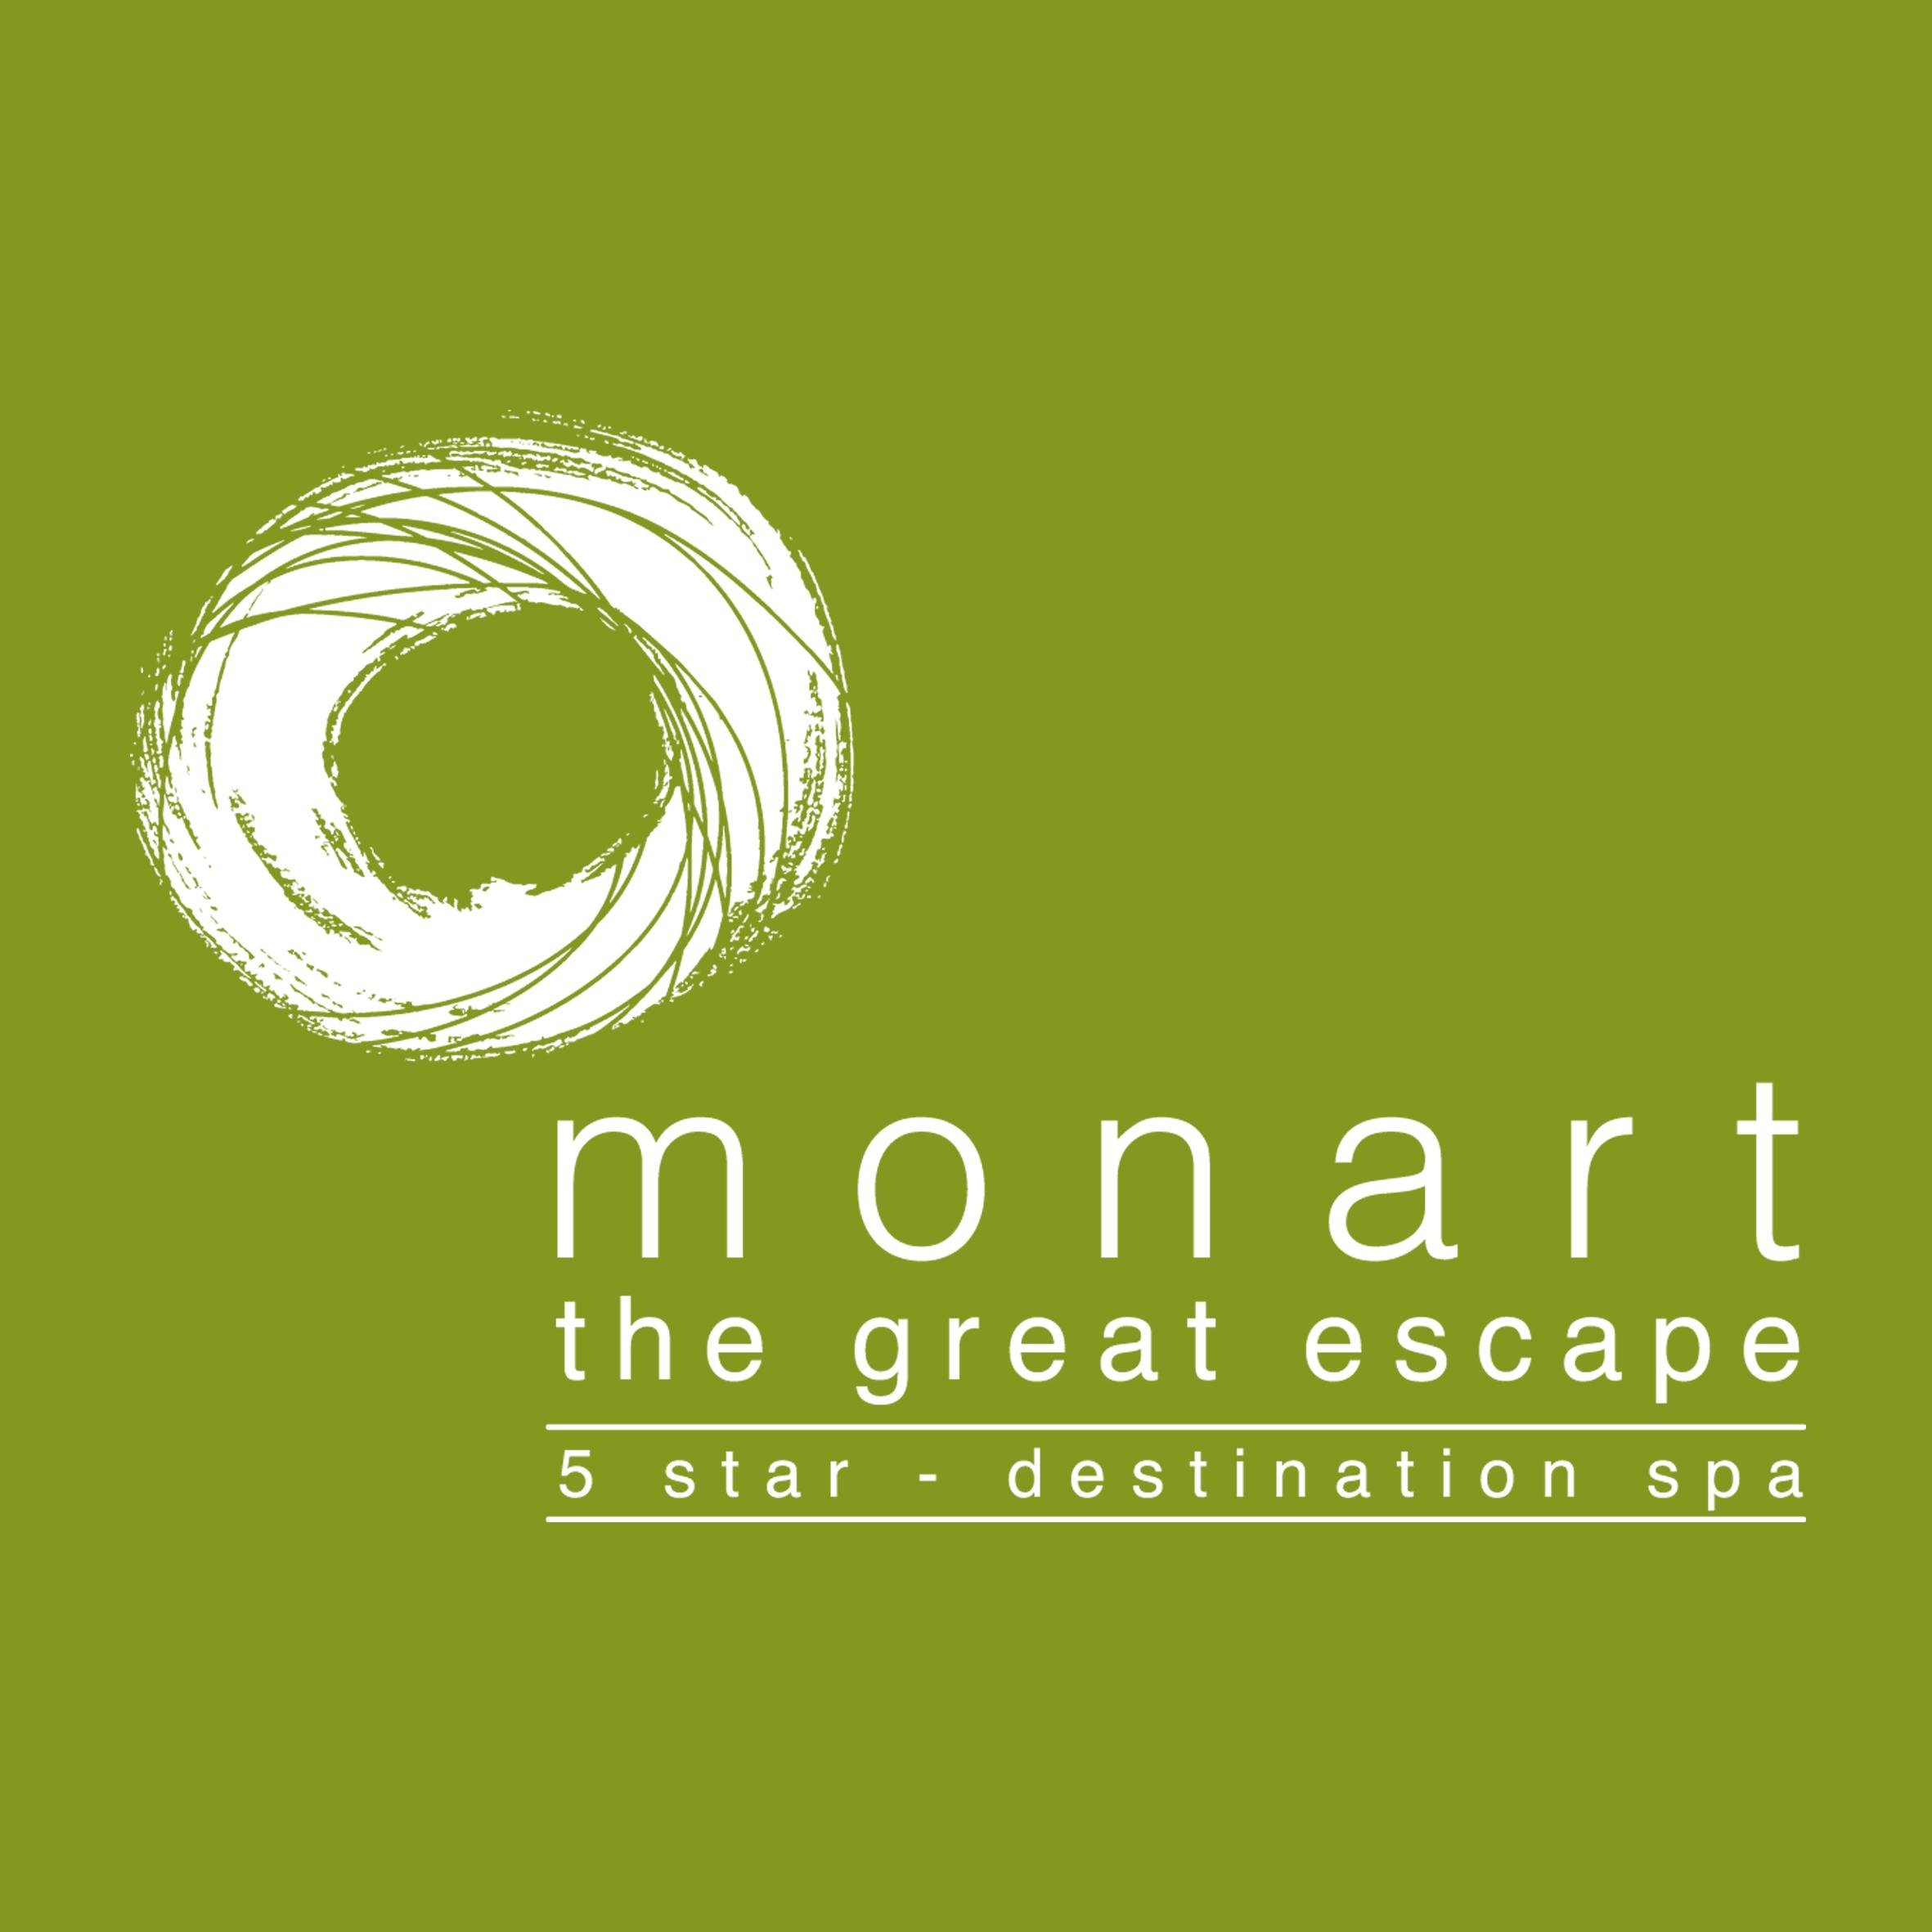 #Ireland's only #DestinationSpa 
#Monart has been voted in the top 3 #DestinationSpas worldwide by #CondeNast magazine's readers choice #Awards #AdultsOnly